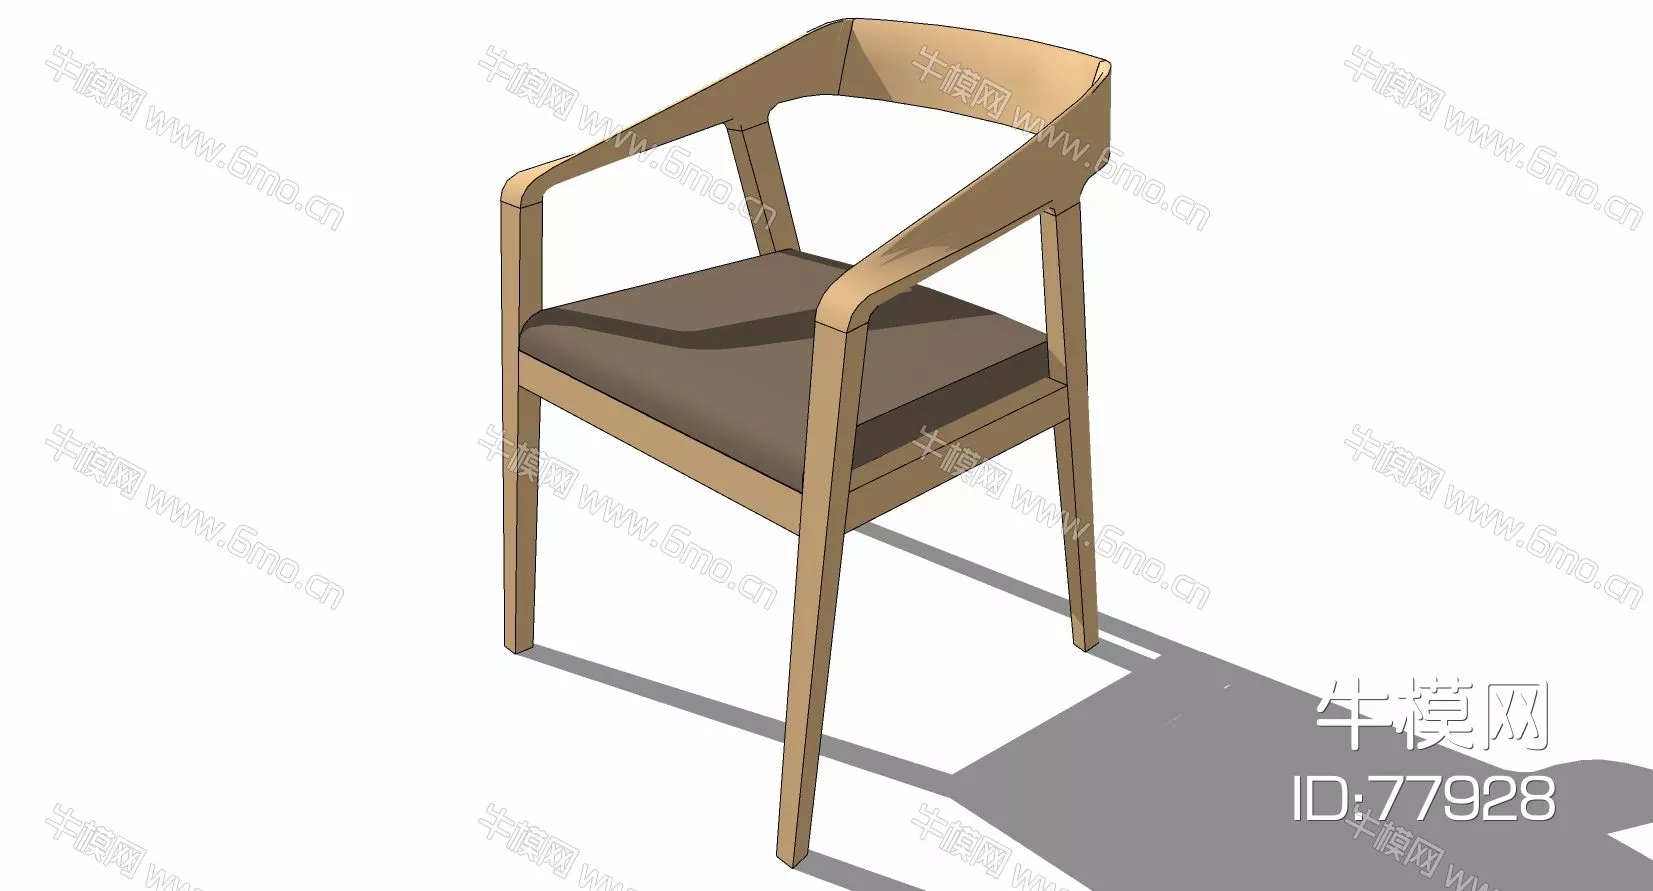 CHINESE LOUNGLE CHAIR - SKETCHUP 3D MODEL - ENSCAPE - 77928